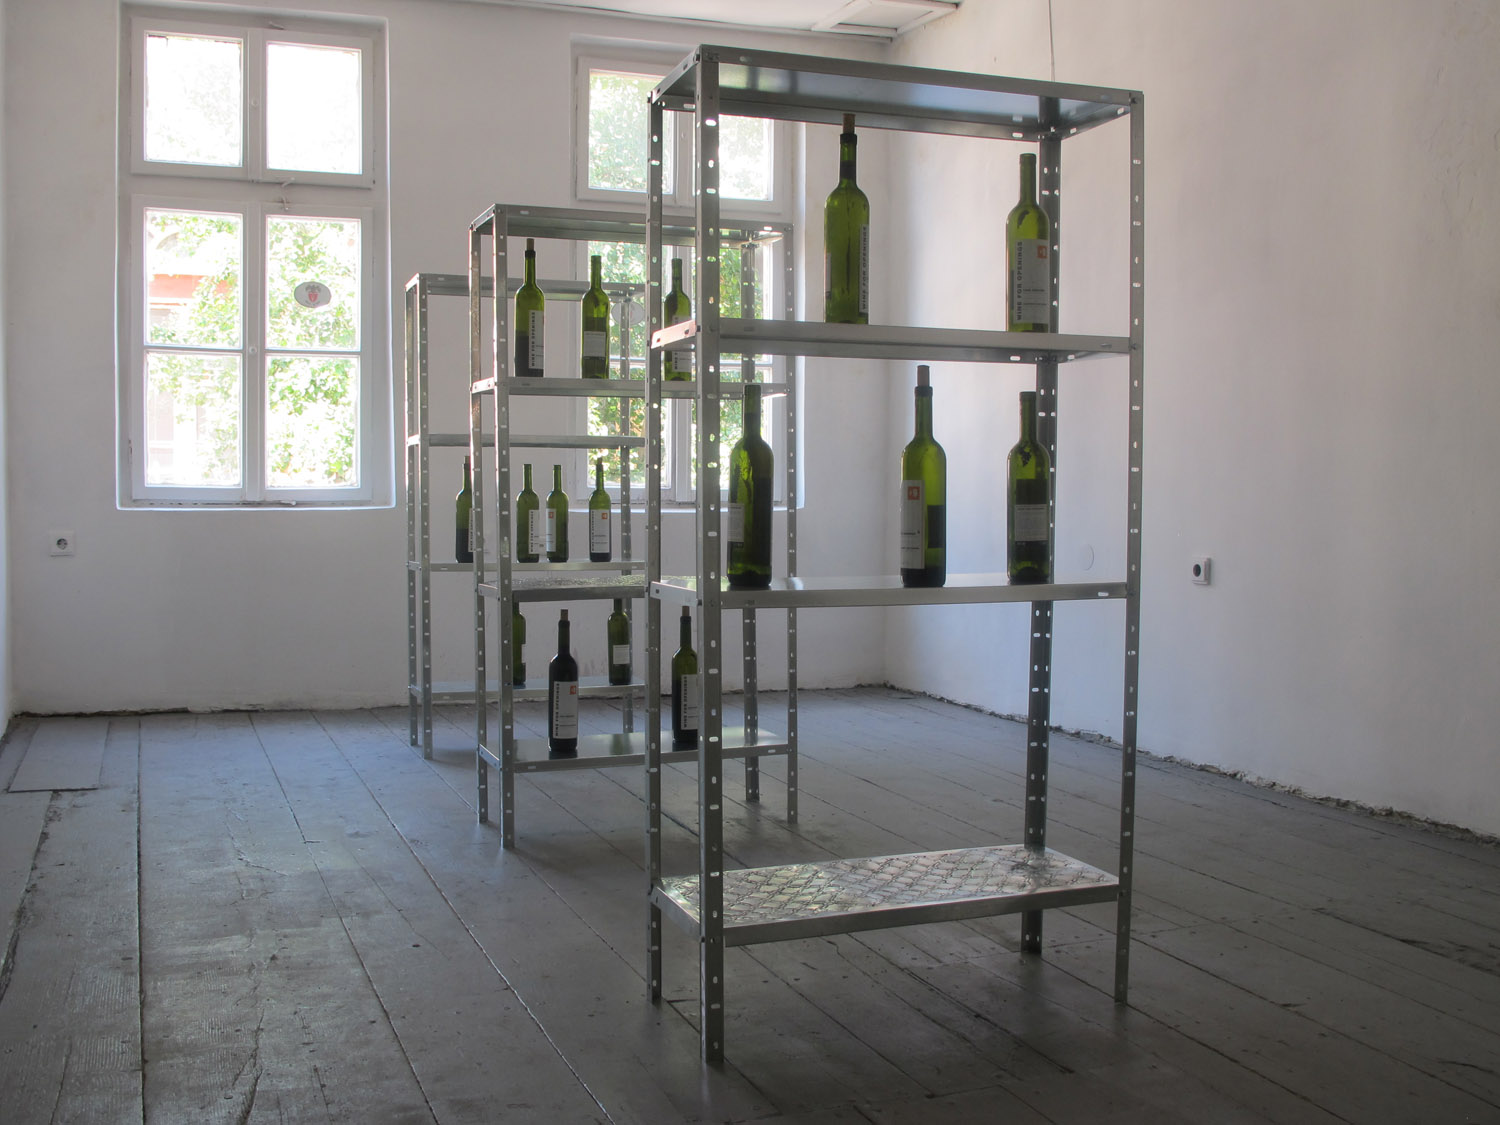 Already Made 8, 2014. A series of 3 handmade metal stands, ornamented by Anastas Moudov. Installation view, Sariev Project Space, Plovdiv.